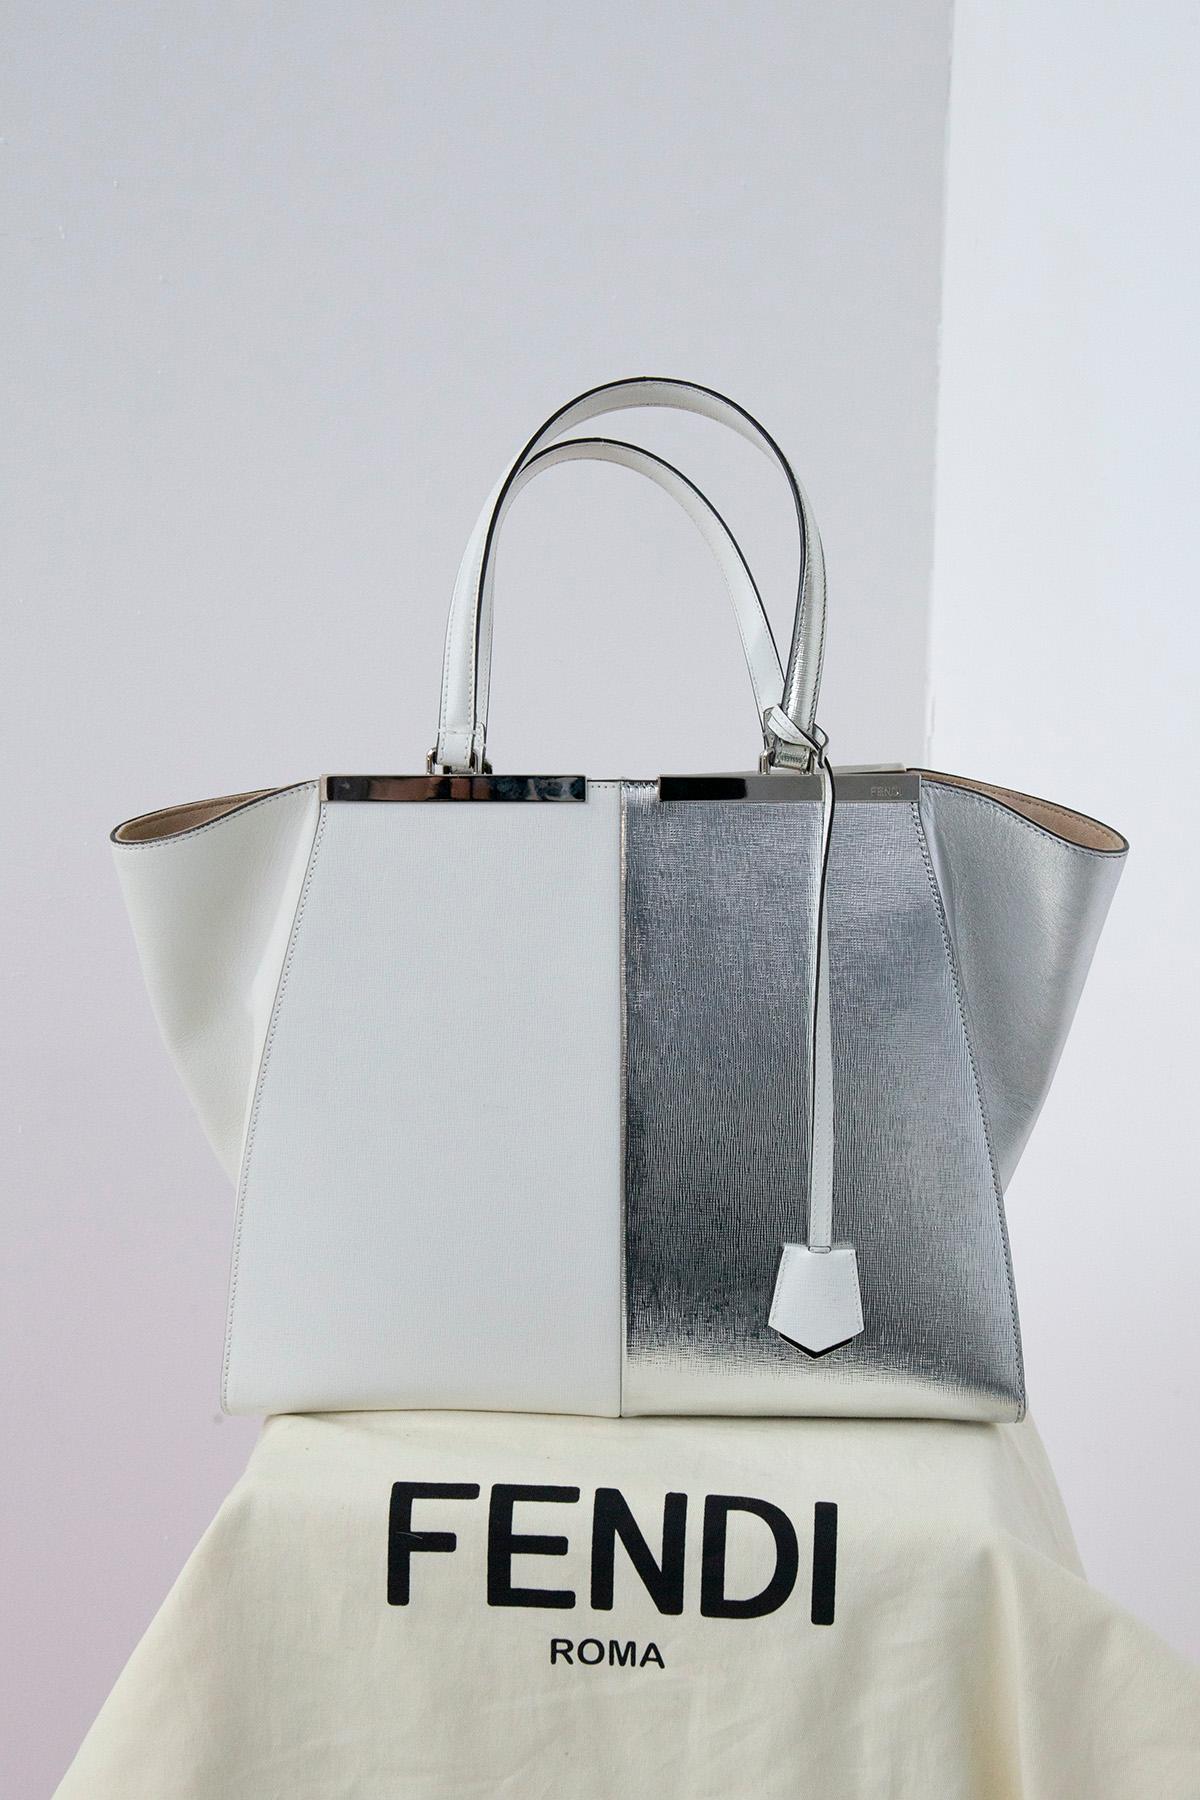 Large day bag by Fendi model 3Jours white. Year of manufacture: 2010-2019 made of white leather. The bag presents a great quality its double color on one side presents silver gray leather and on the other side we find a wonderful white leather.